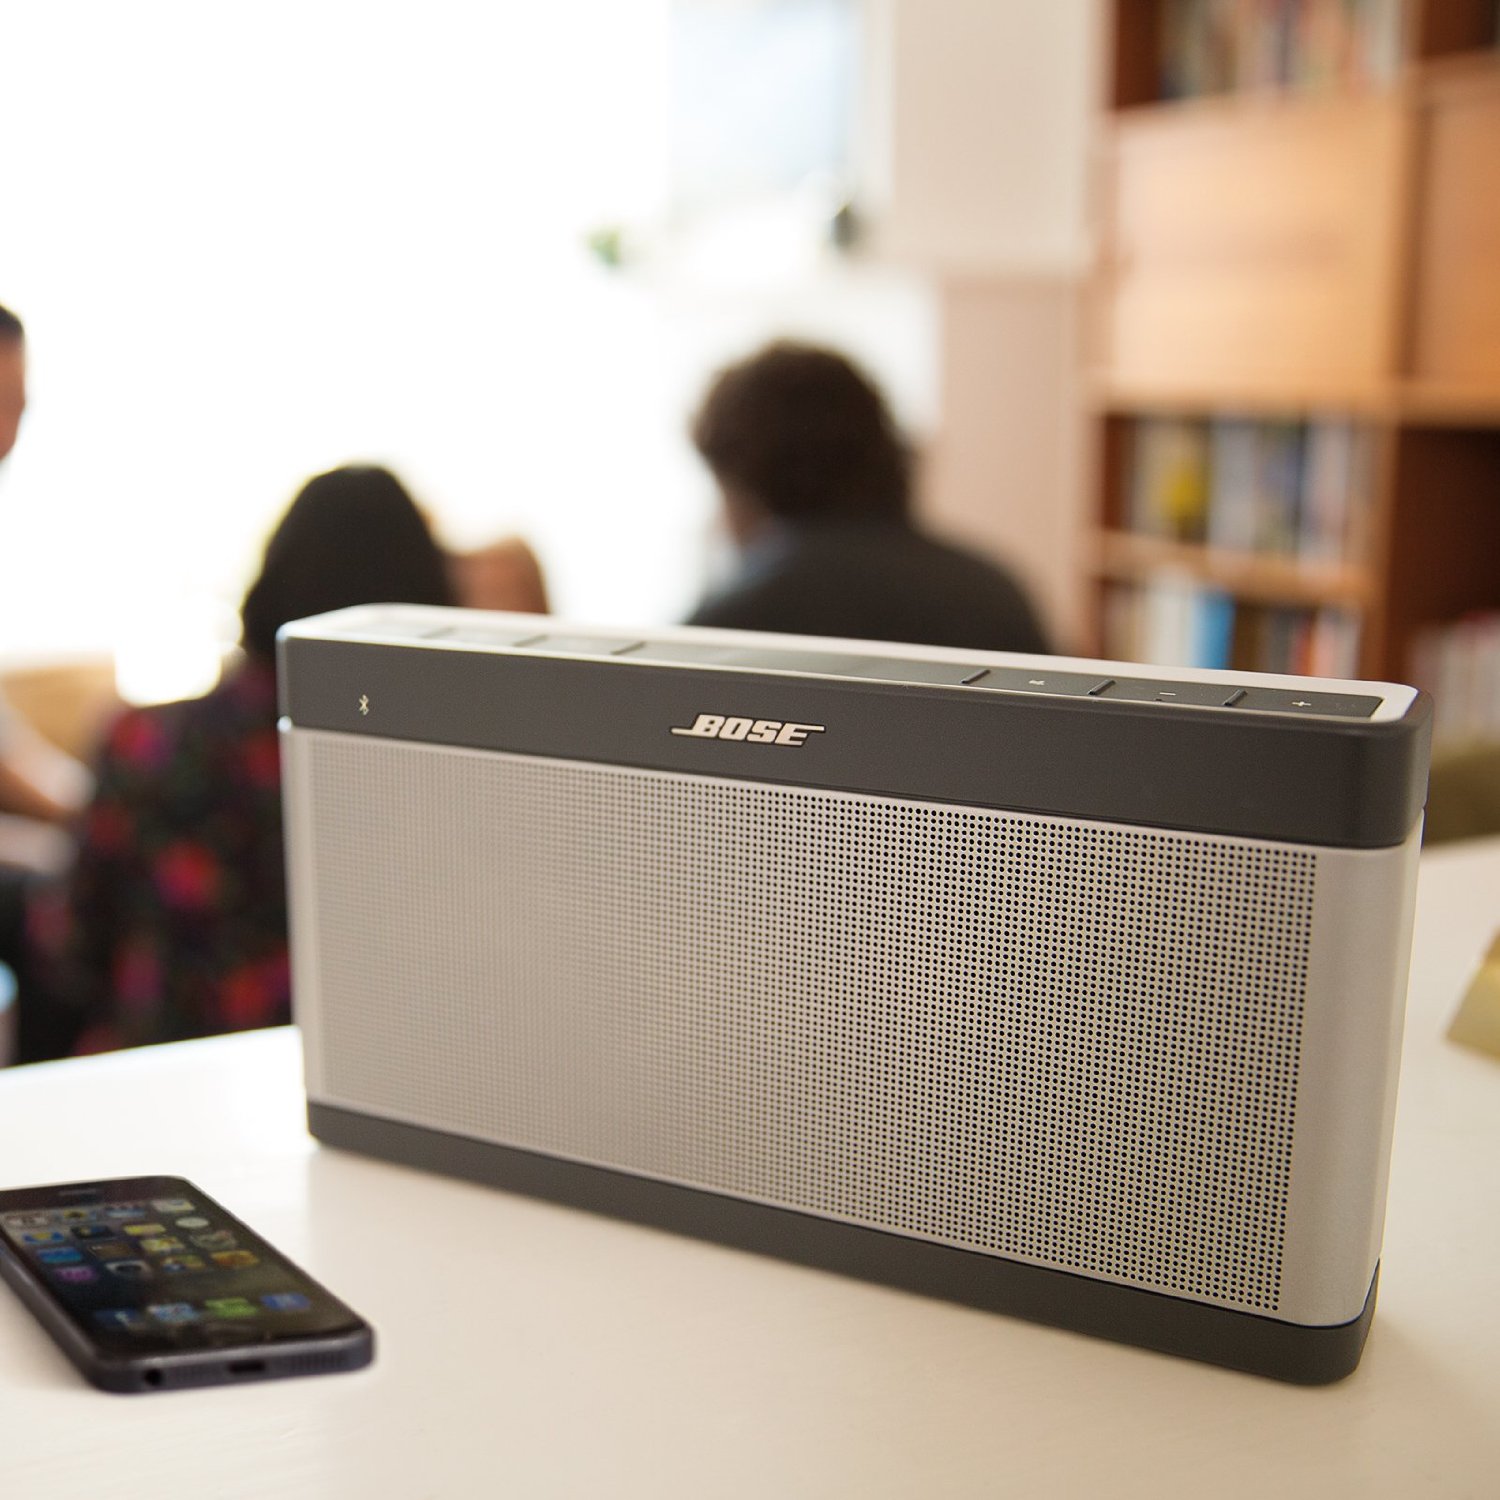 Bose SoundLink Bluetooth Speaker III brings the party to your people